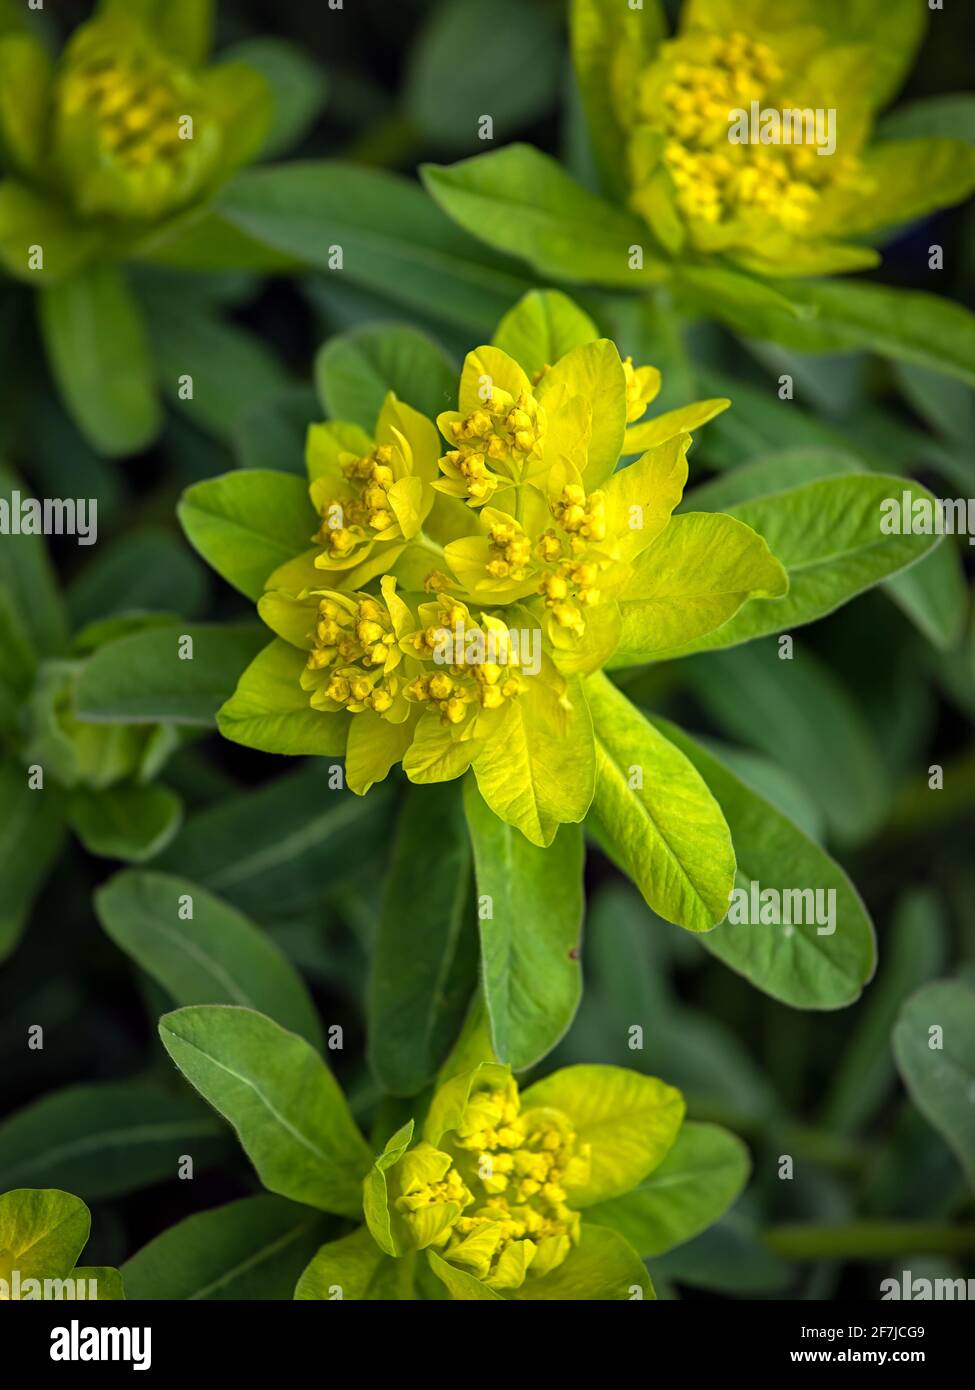 Closeup of flowerheads of Greater cushion spurge, Euphorbia epithymoides 'Major', in spring against green background Stock Photo